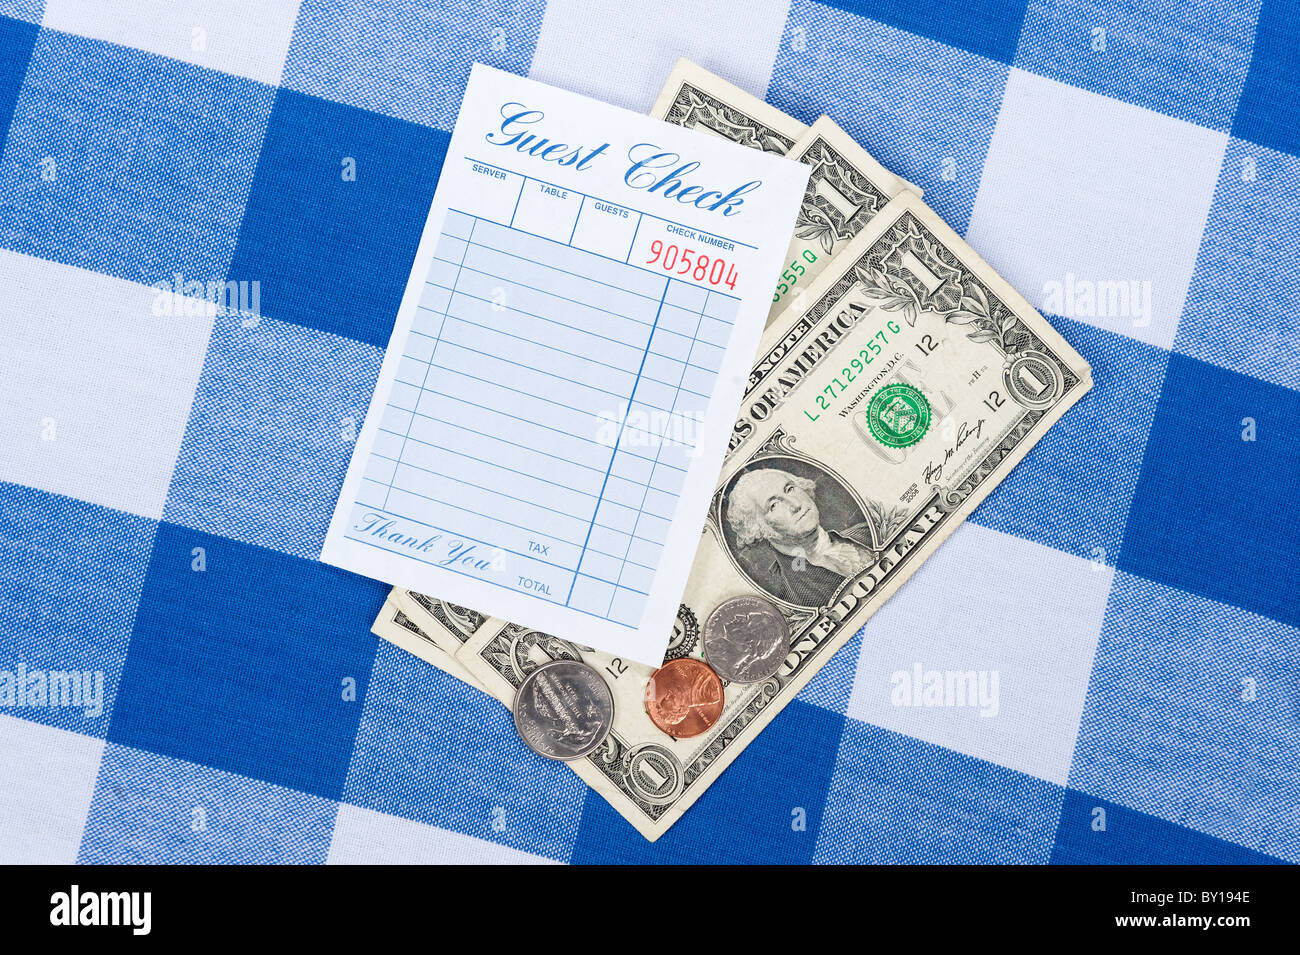 A meal check from a restaurant with change on a checkered table cloth Stock Photo